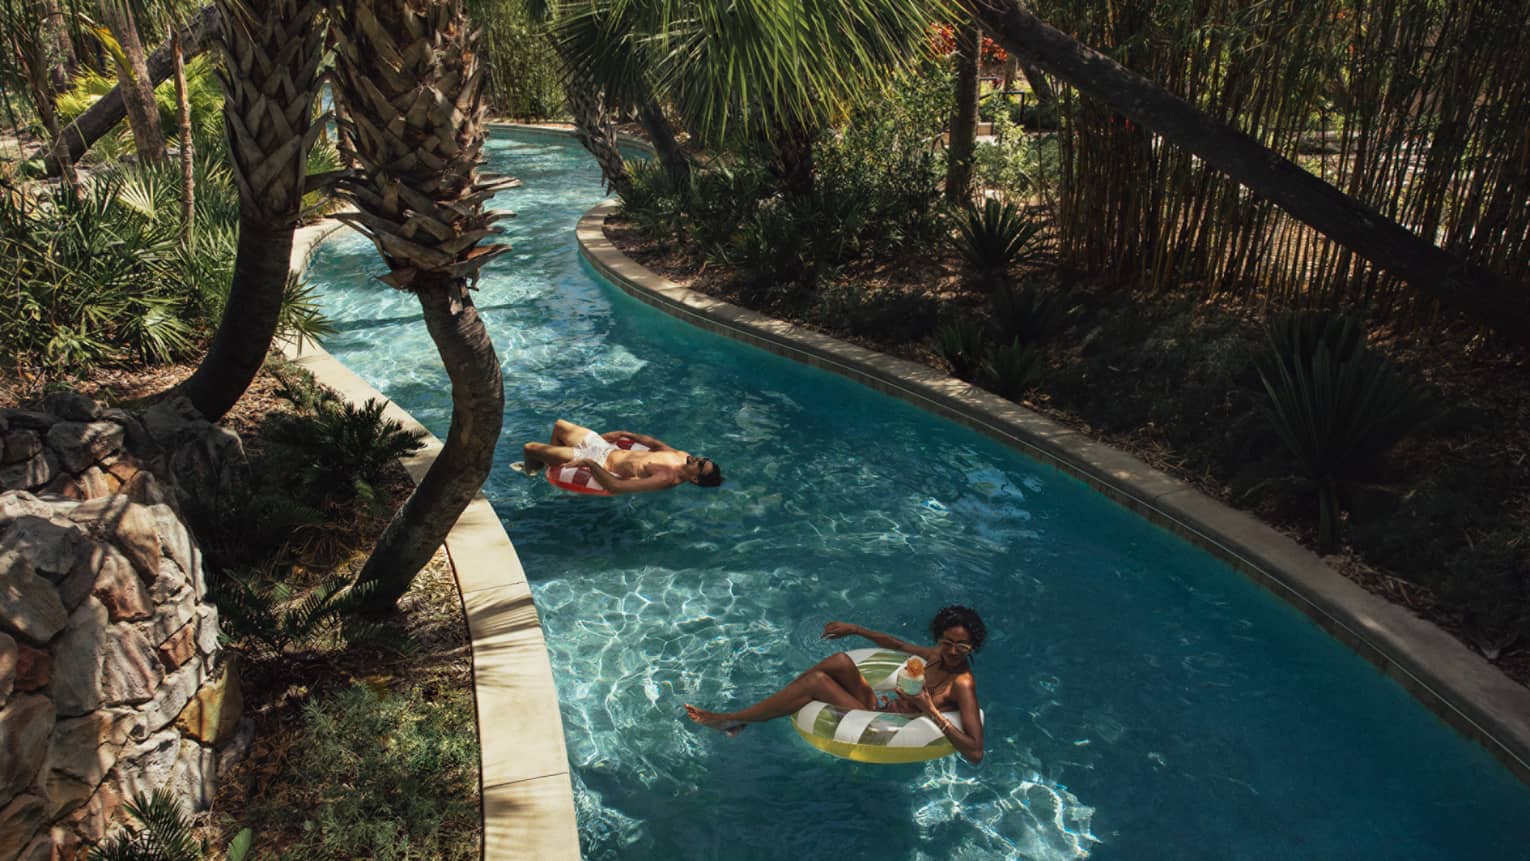 Two guests on floats on the lazy river.